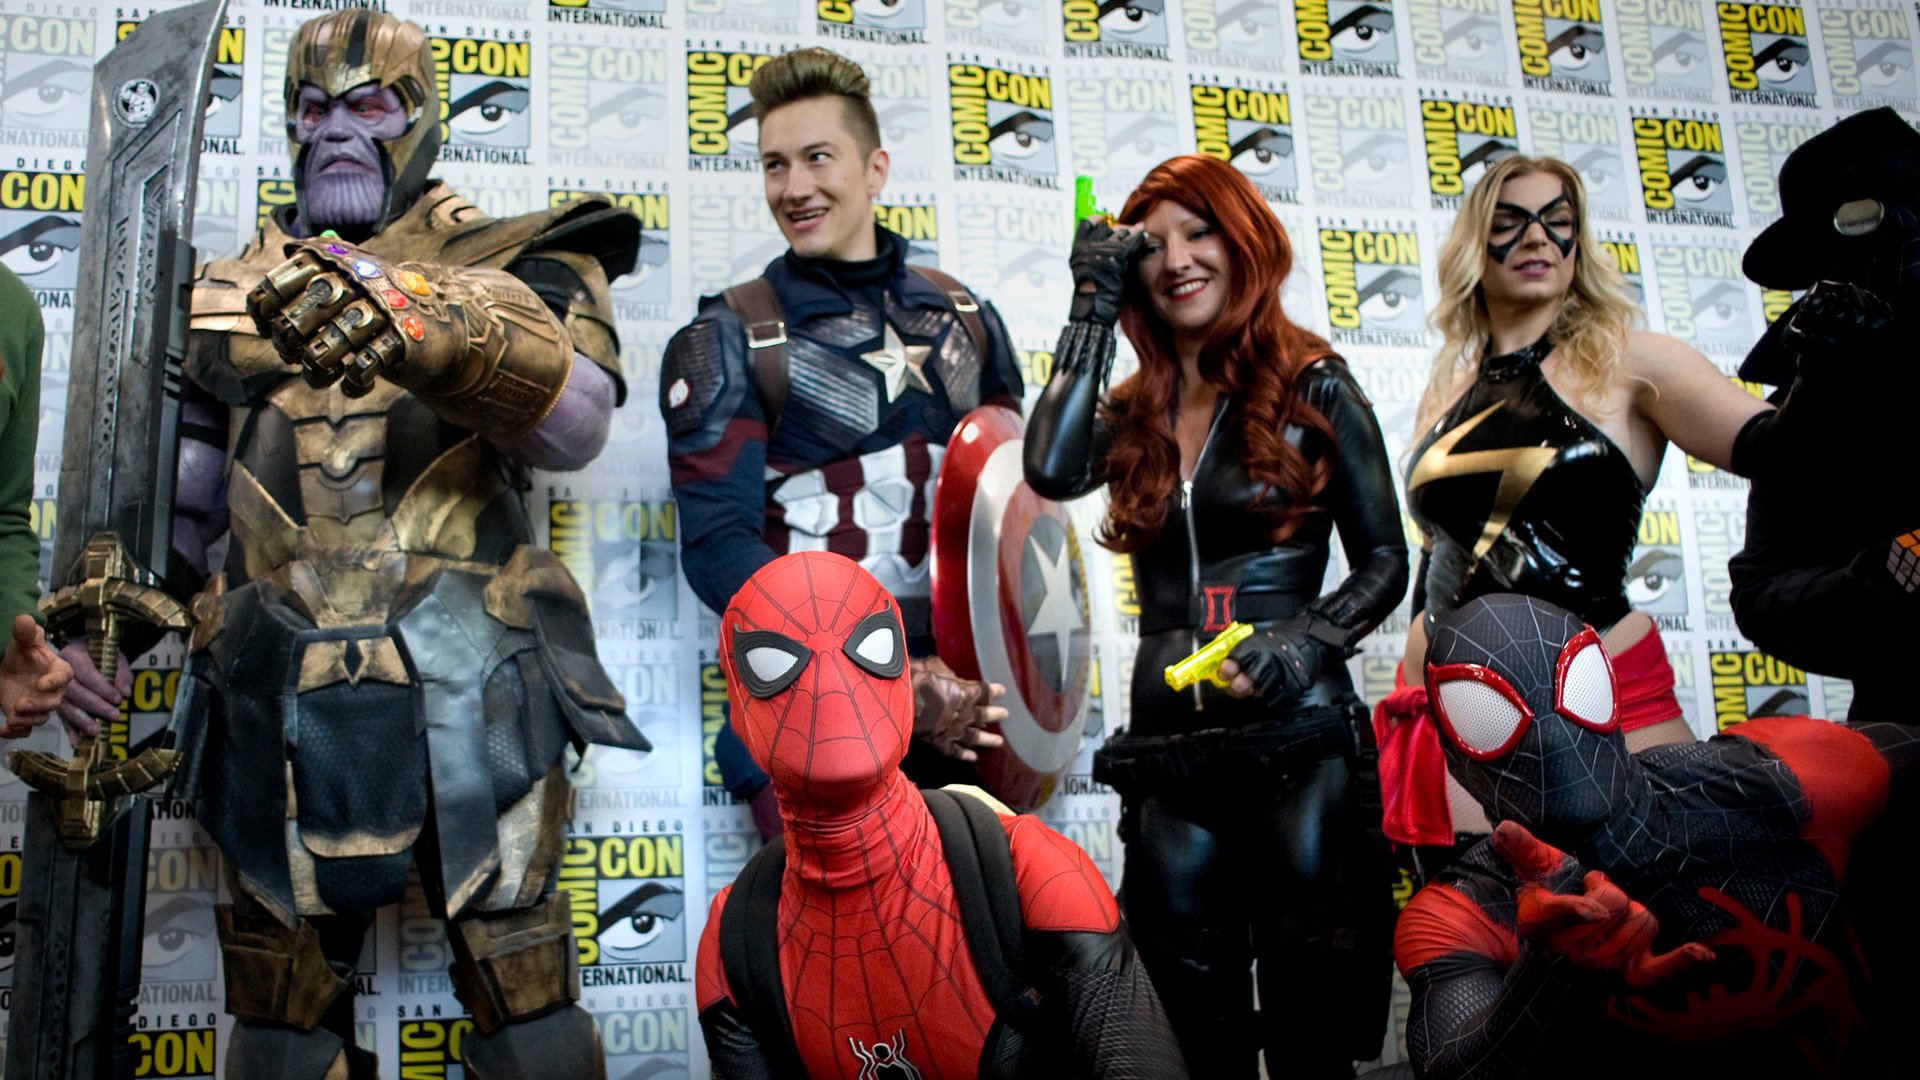 A photo of San Diego Comic-Con attendees dressed in Marvel cosplay.